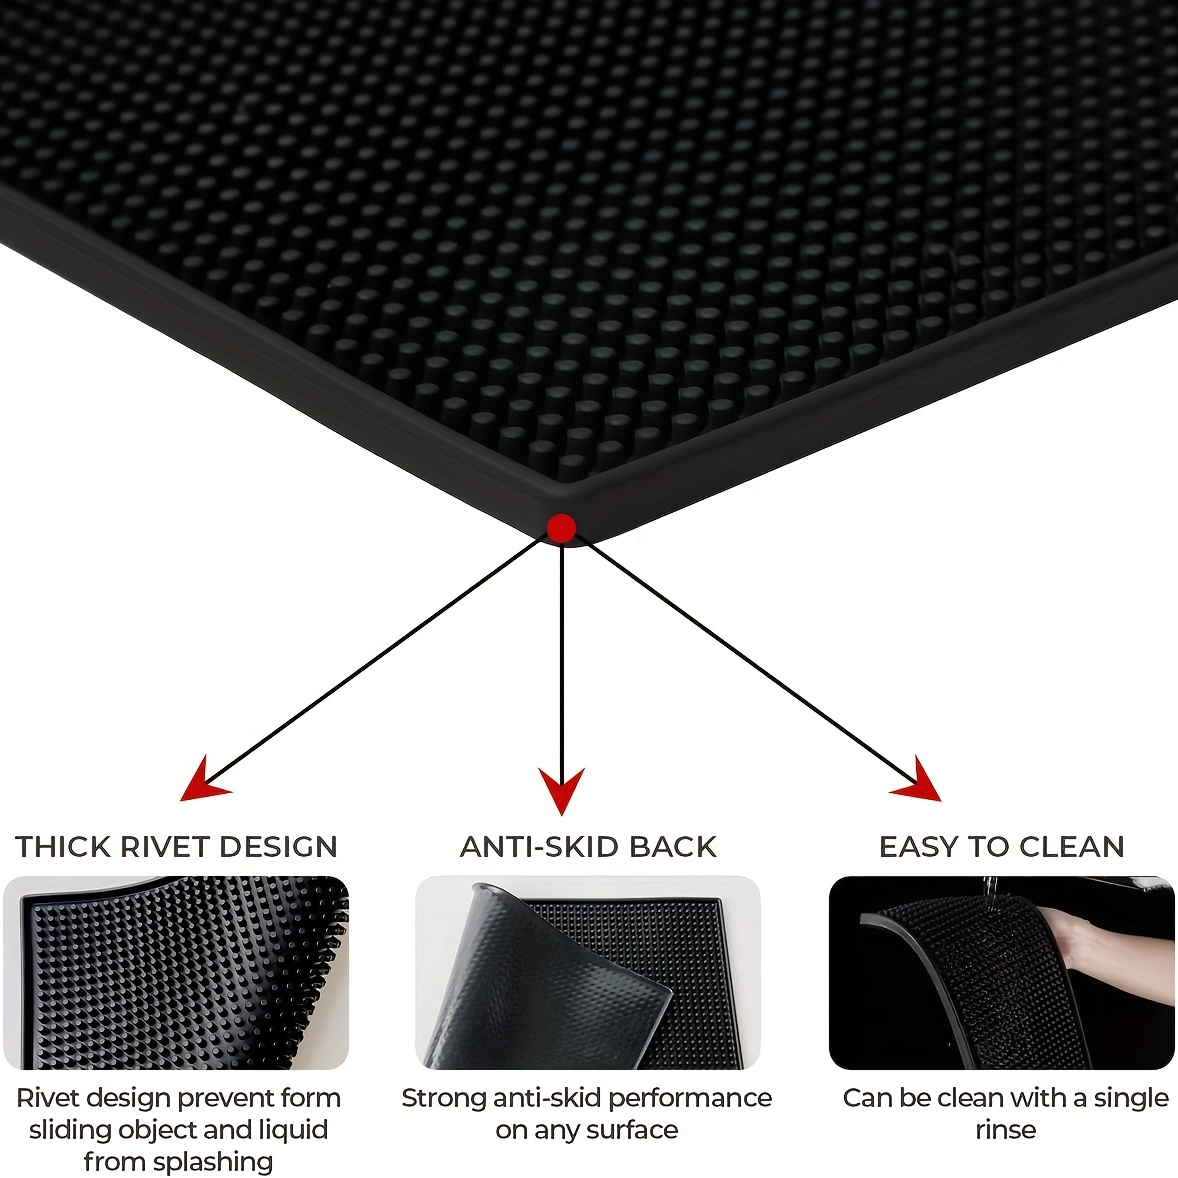 Black Spill Bar Mats  Drying, Durable and Stylish Spill Mats for Bars,  Restaurants, Coffee Shops, Bar Mats for Countertop and Table Top, Non-Slip  & Non-Toxic Mats,Style 1 